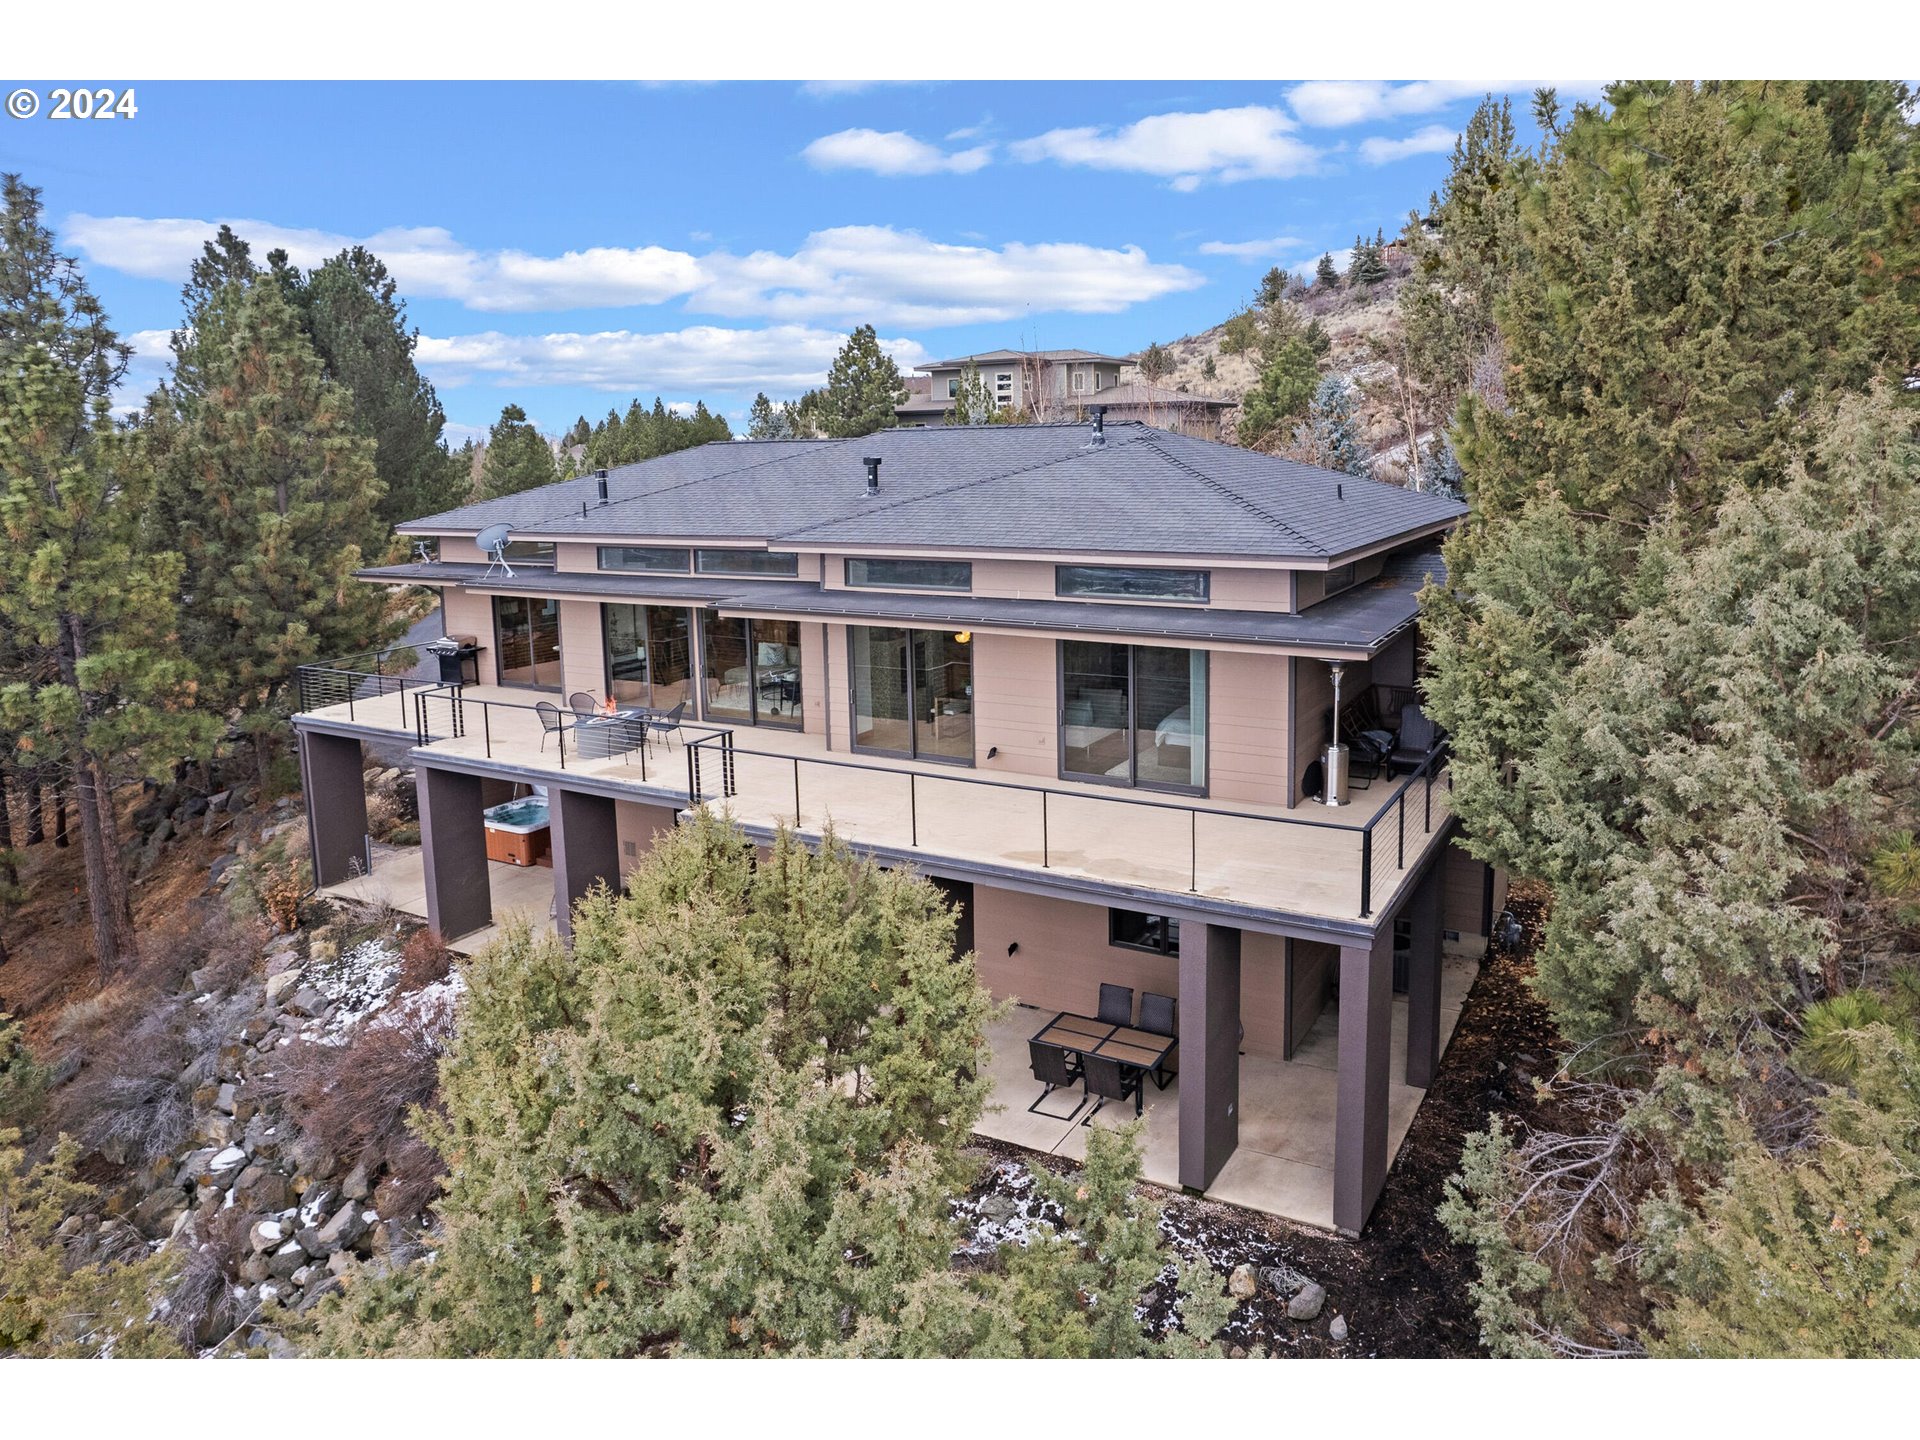 2474 NW WYETH PL, Bend, OR 